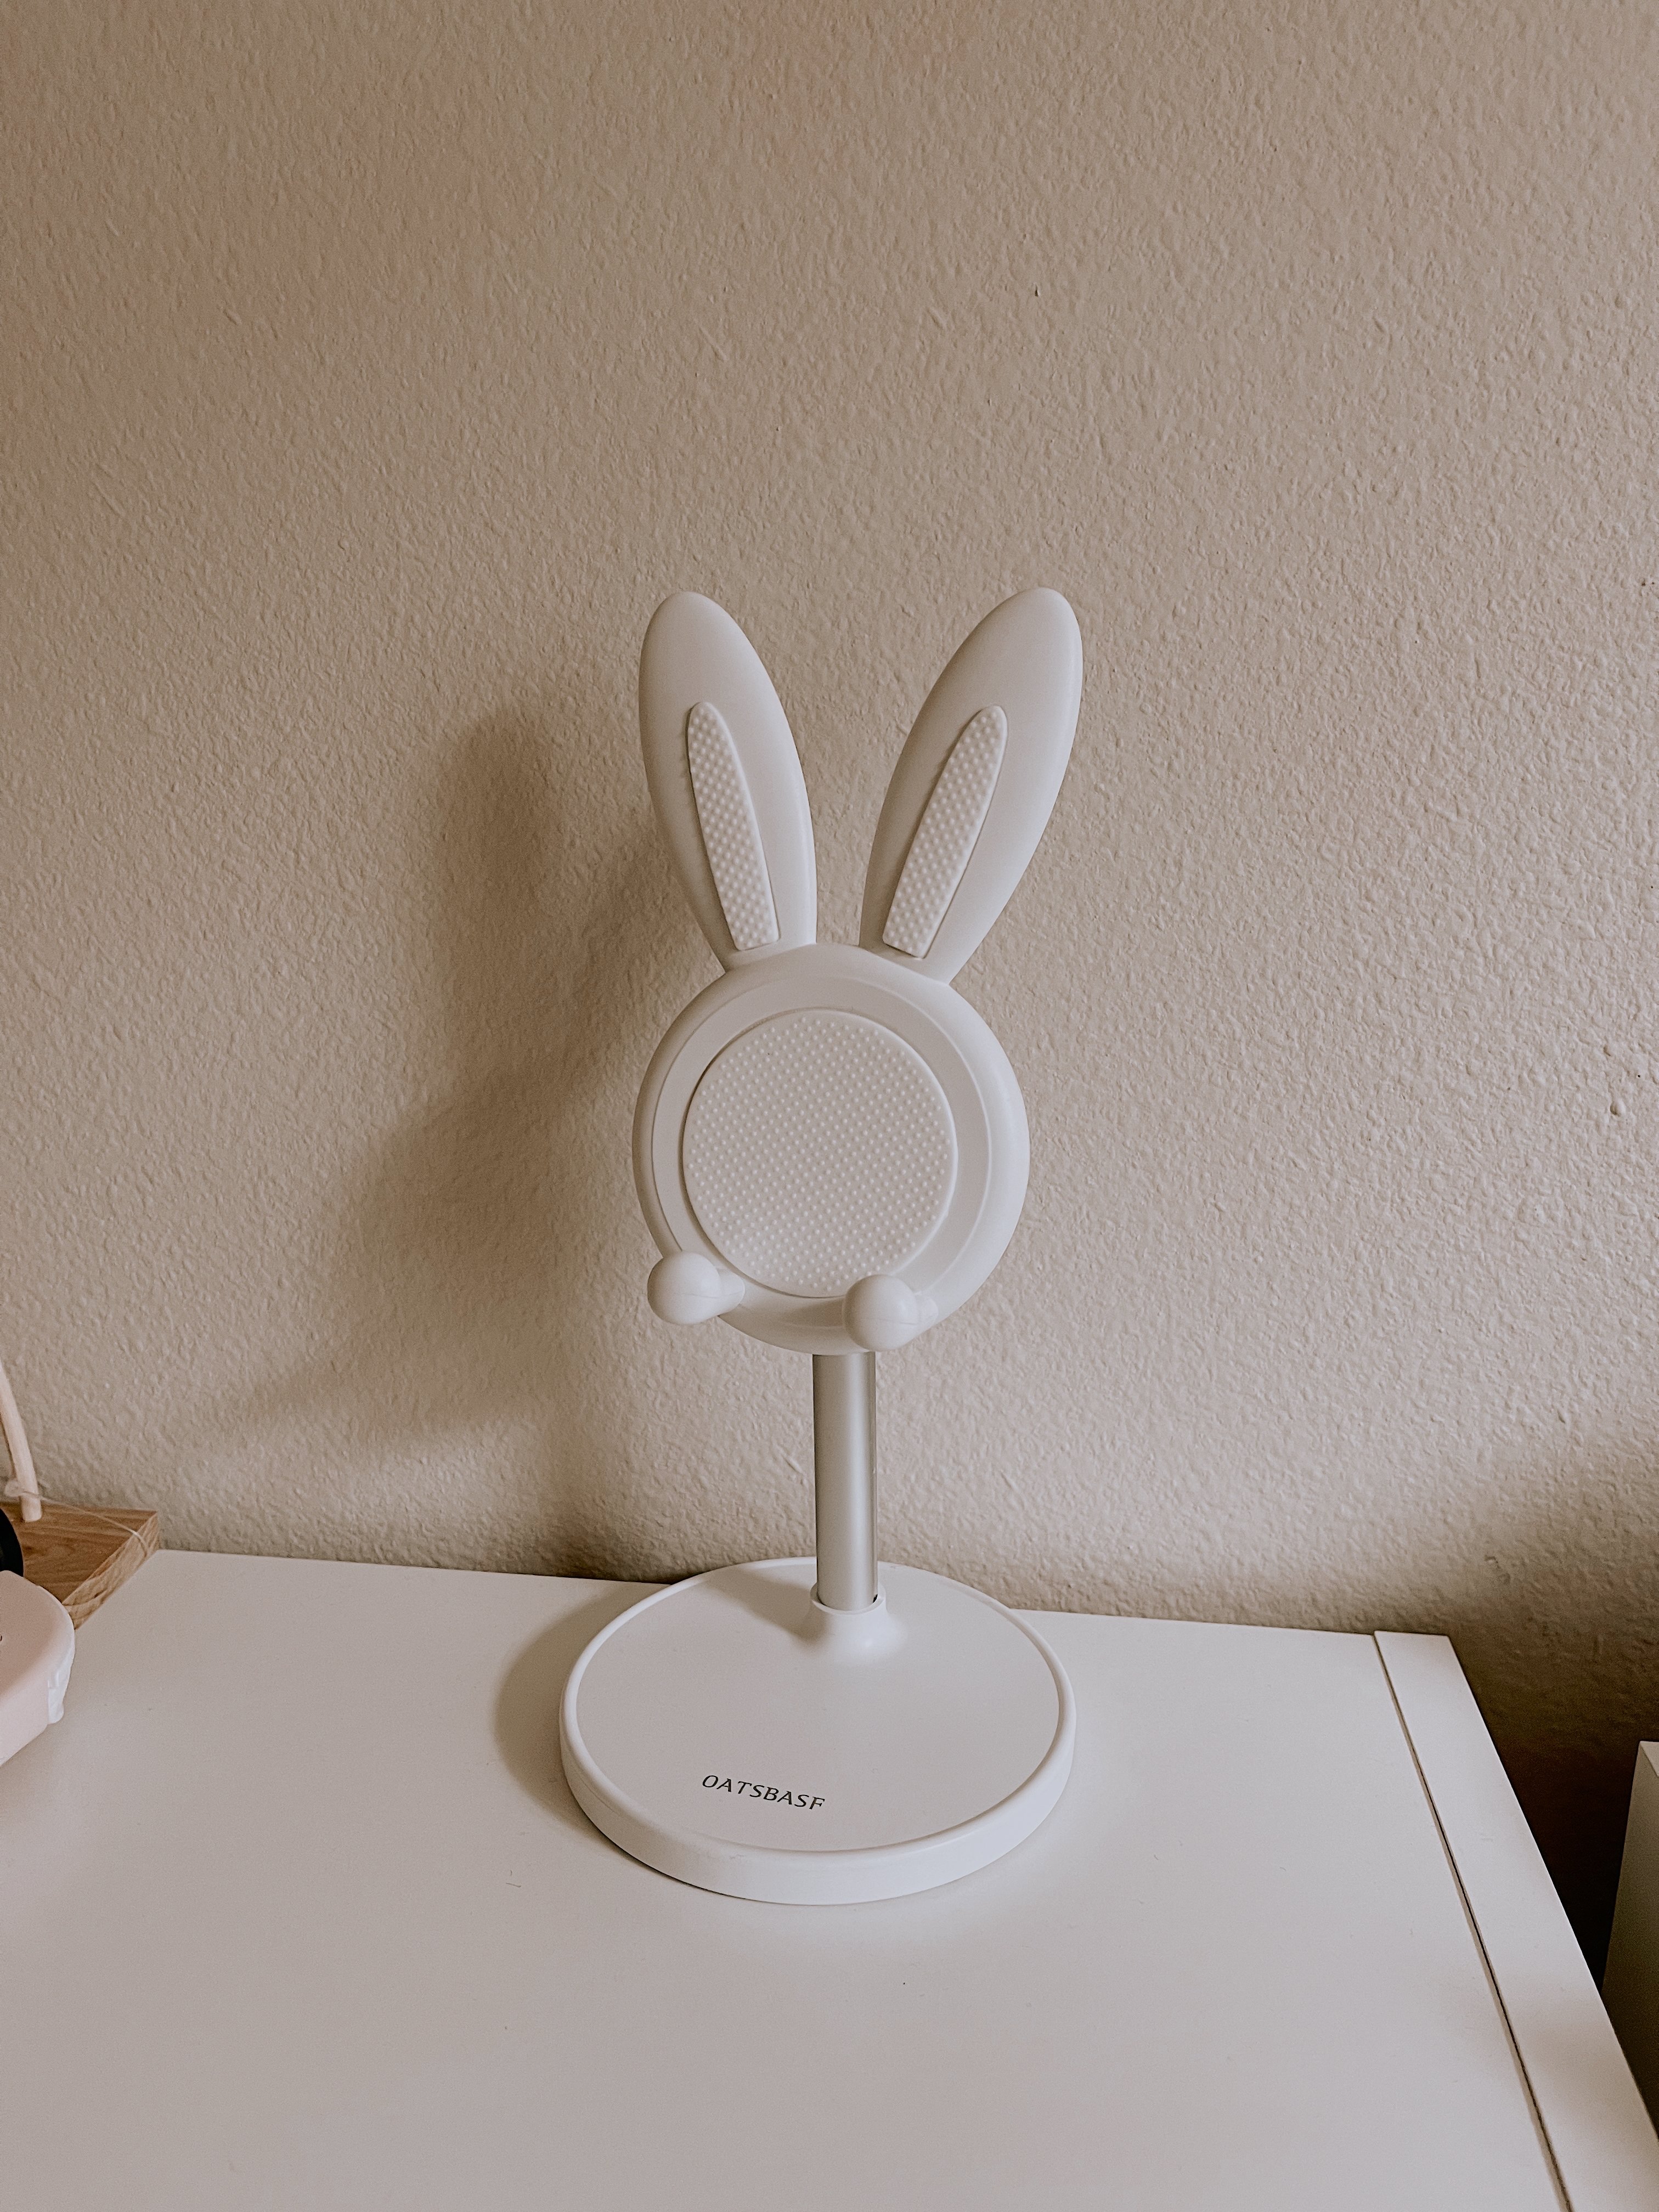 Bunny Phone Stand